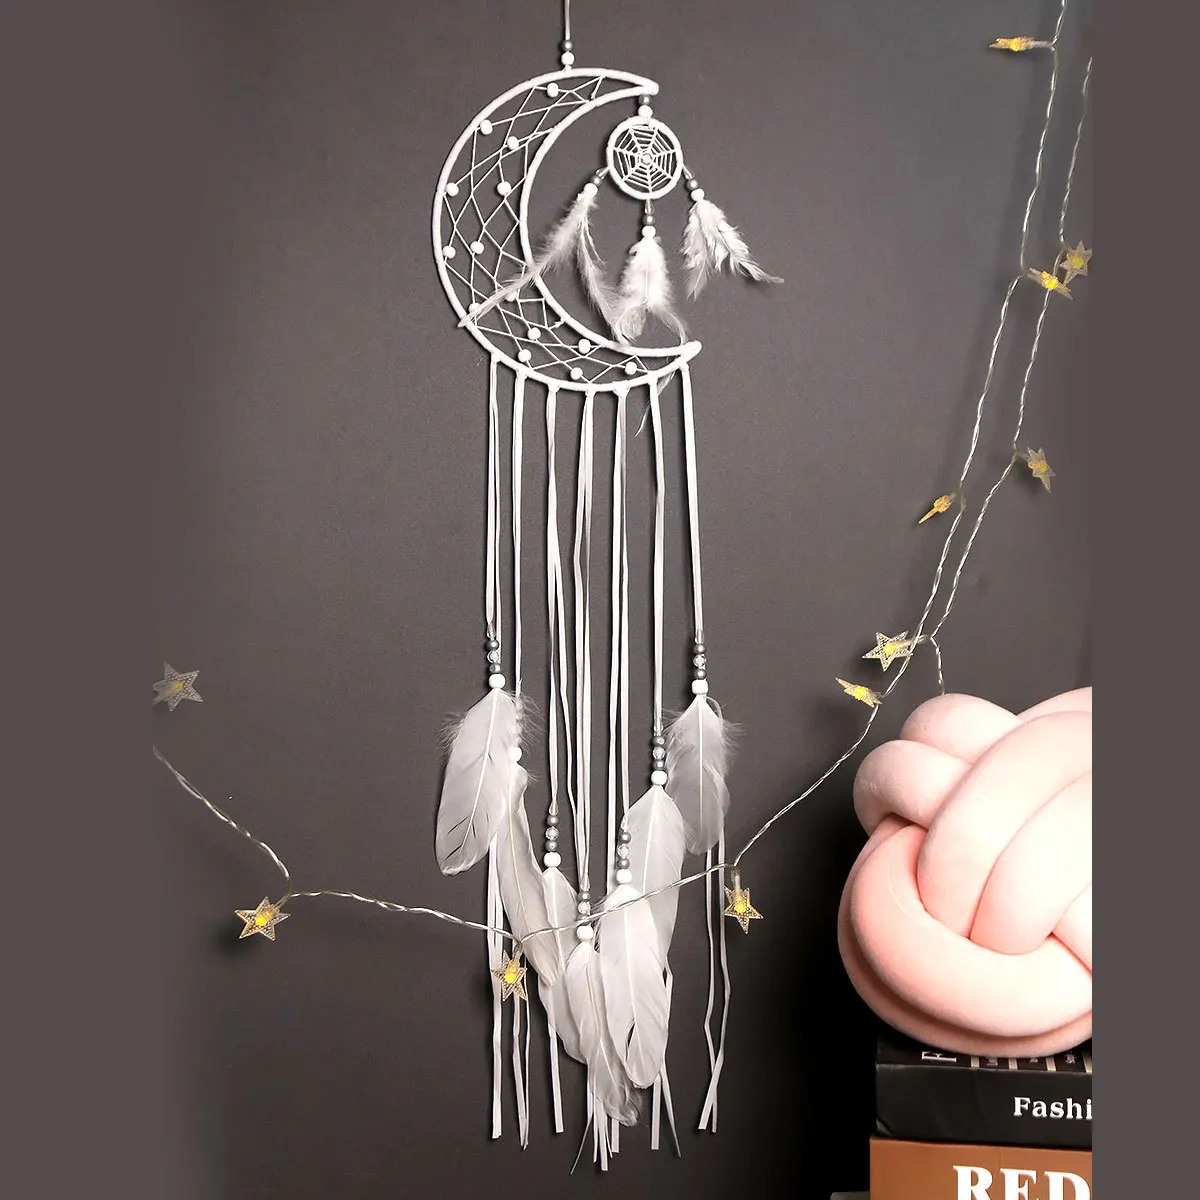 

Indian Feather Dreamcatcher Moon Star Wall Hanging DIY Room Decor Handmade Aesthetic Retro Dream Catcher Wind Chime Ornament